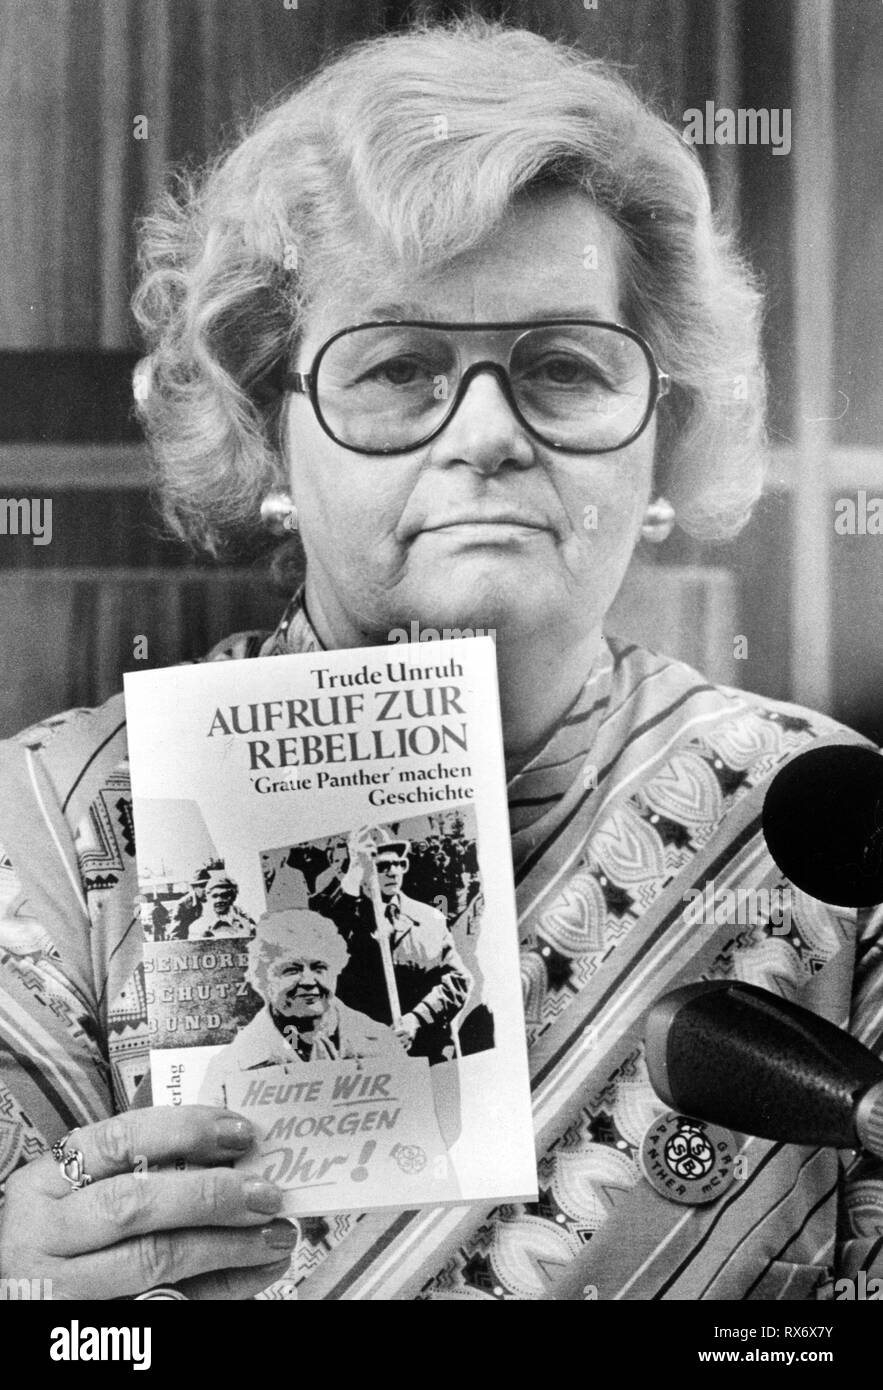 The politician Trude Unruh on 27 September 1984. Trude Unruh founded the "Graue Panther" (Grey Panther) senior citizens' protection association in 1975. From its foundation in 1989 to 2007, she was chairman of the party "Die Grauen - Graue Panther". | usage worldwide Stock Photo